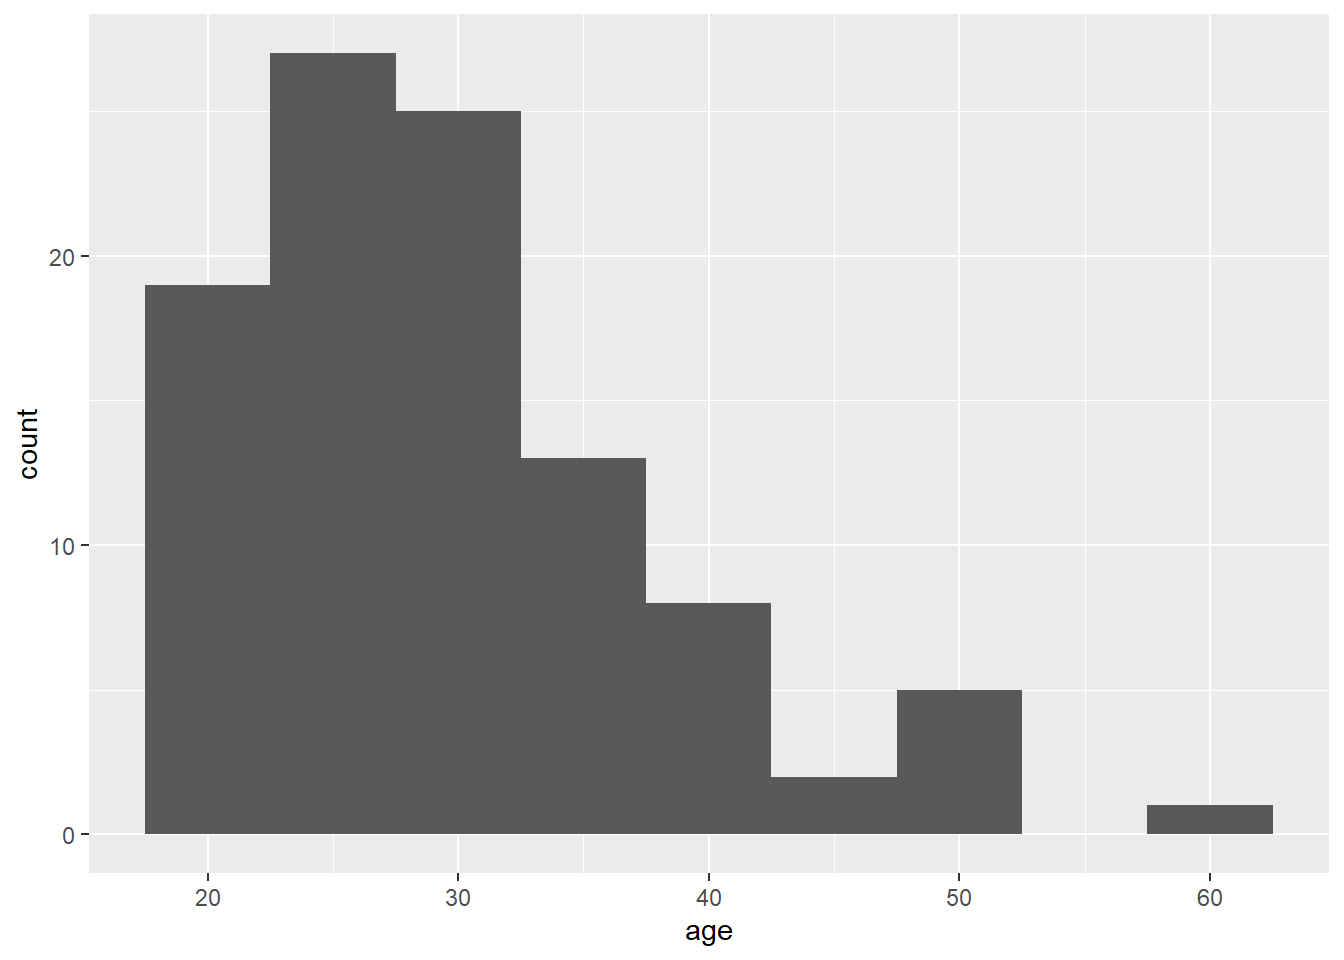 Histogram of ages where each bin covers five years.